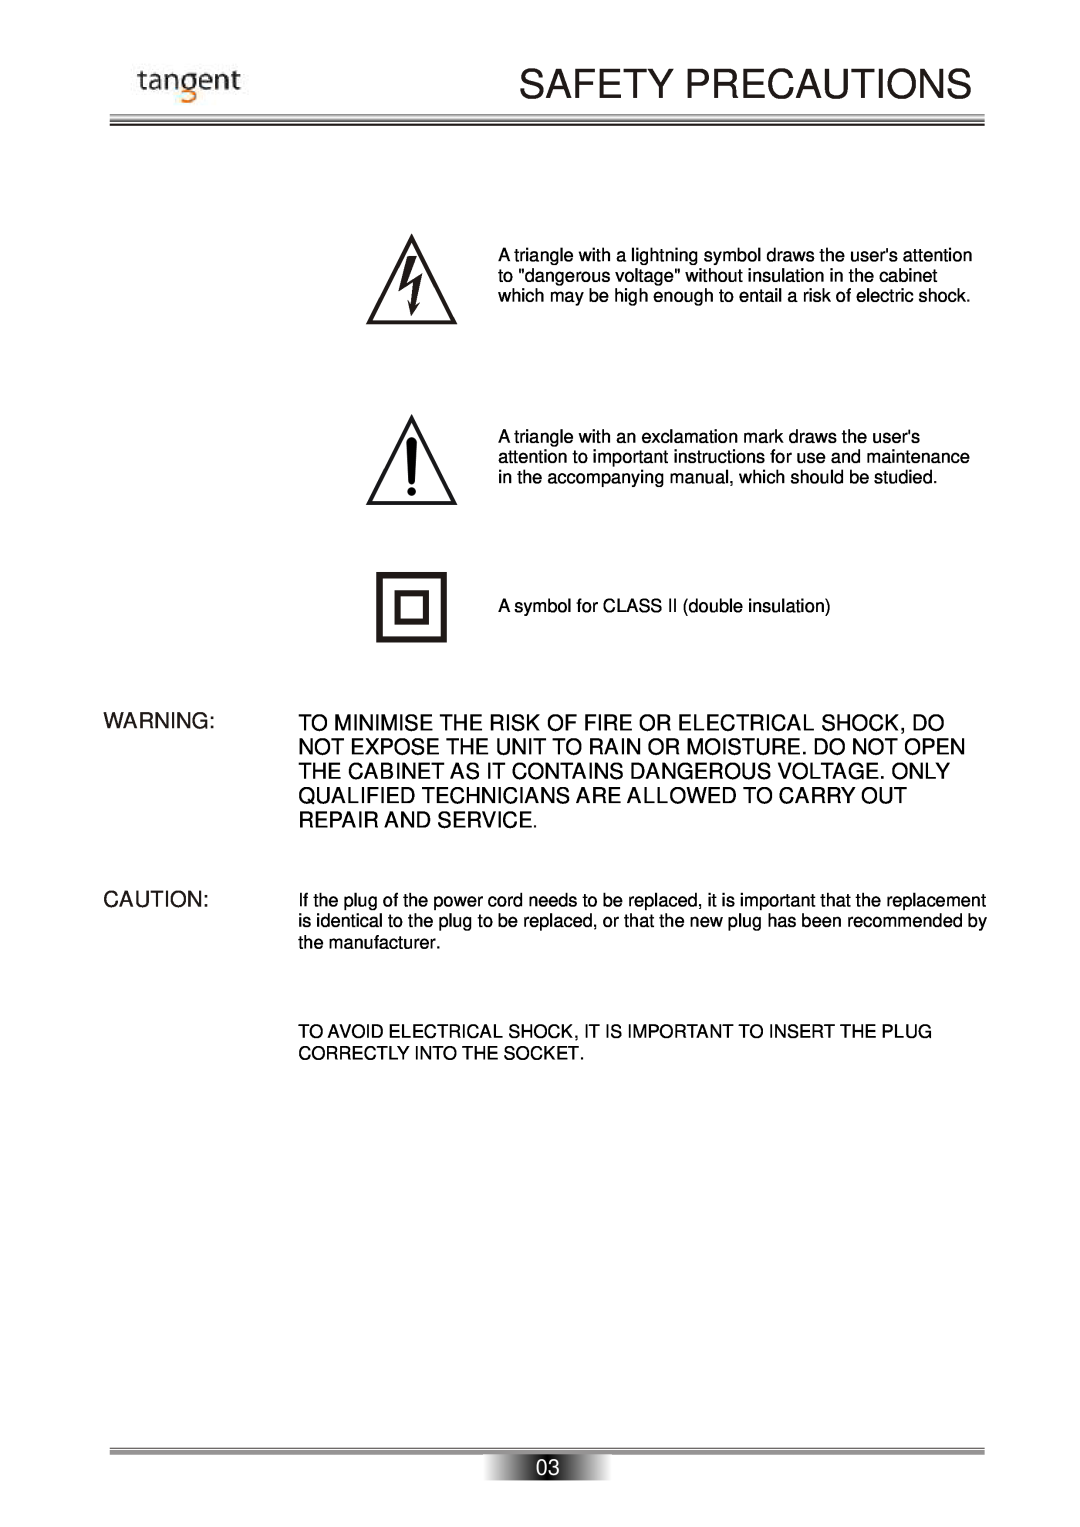 Tangent AMP-50 operation manual Safety Precautions 